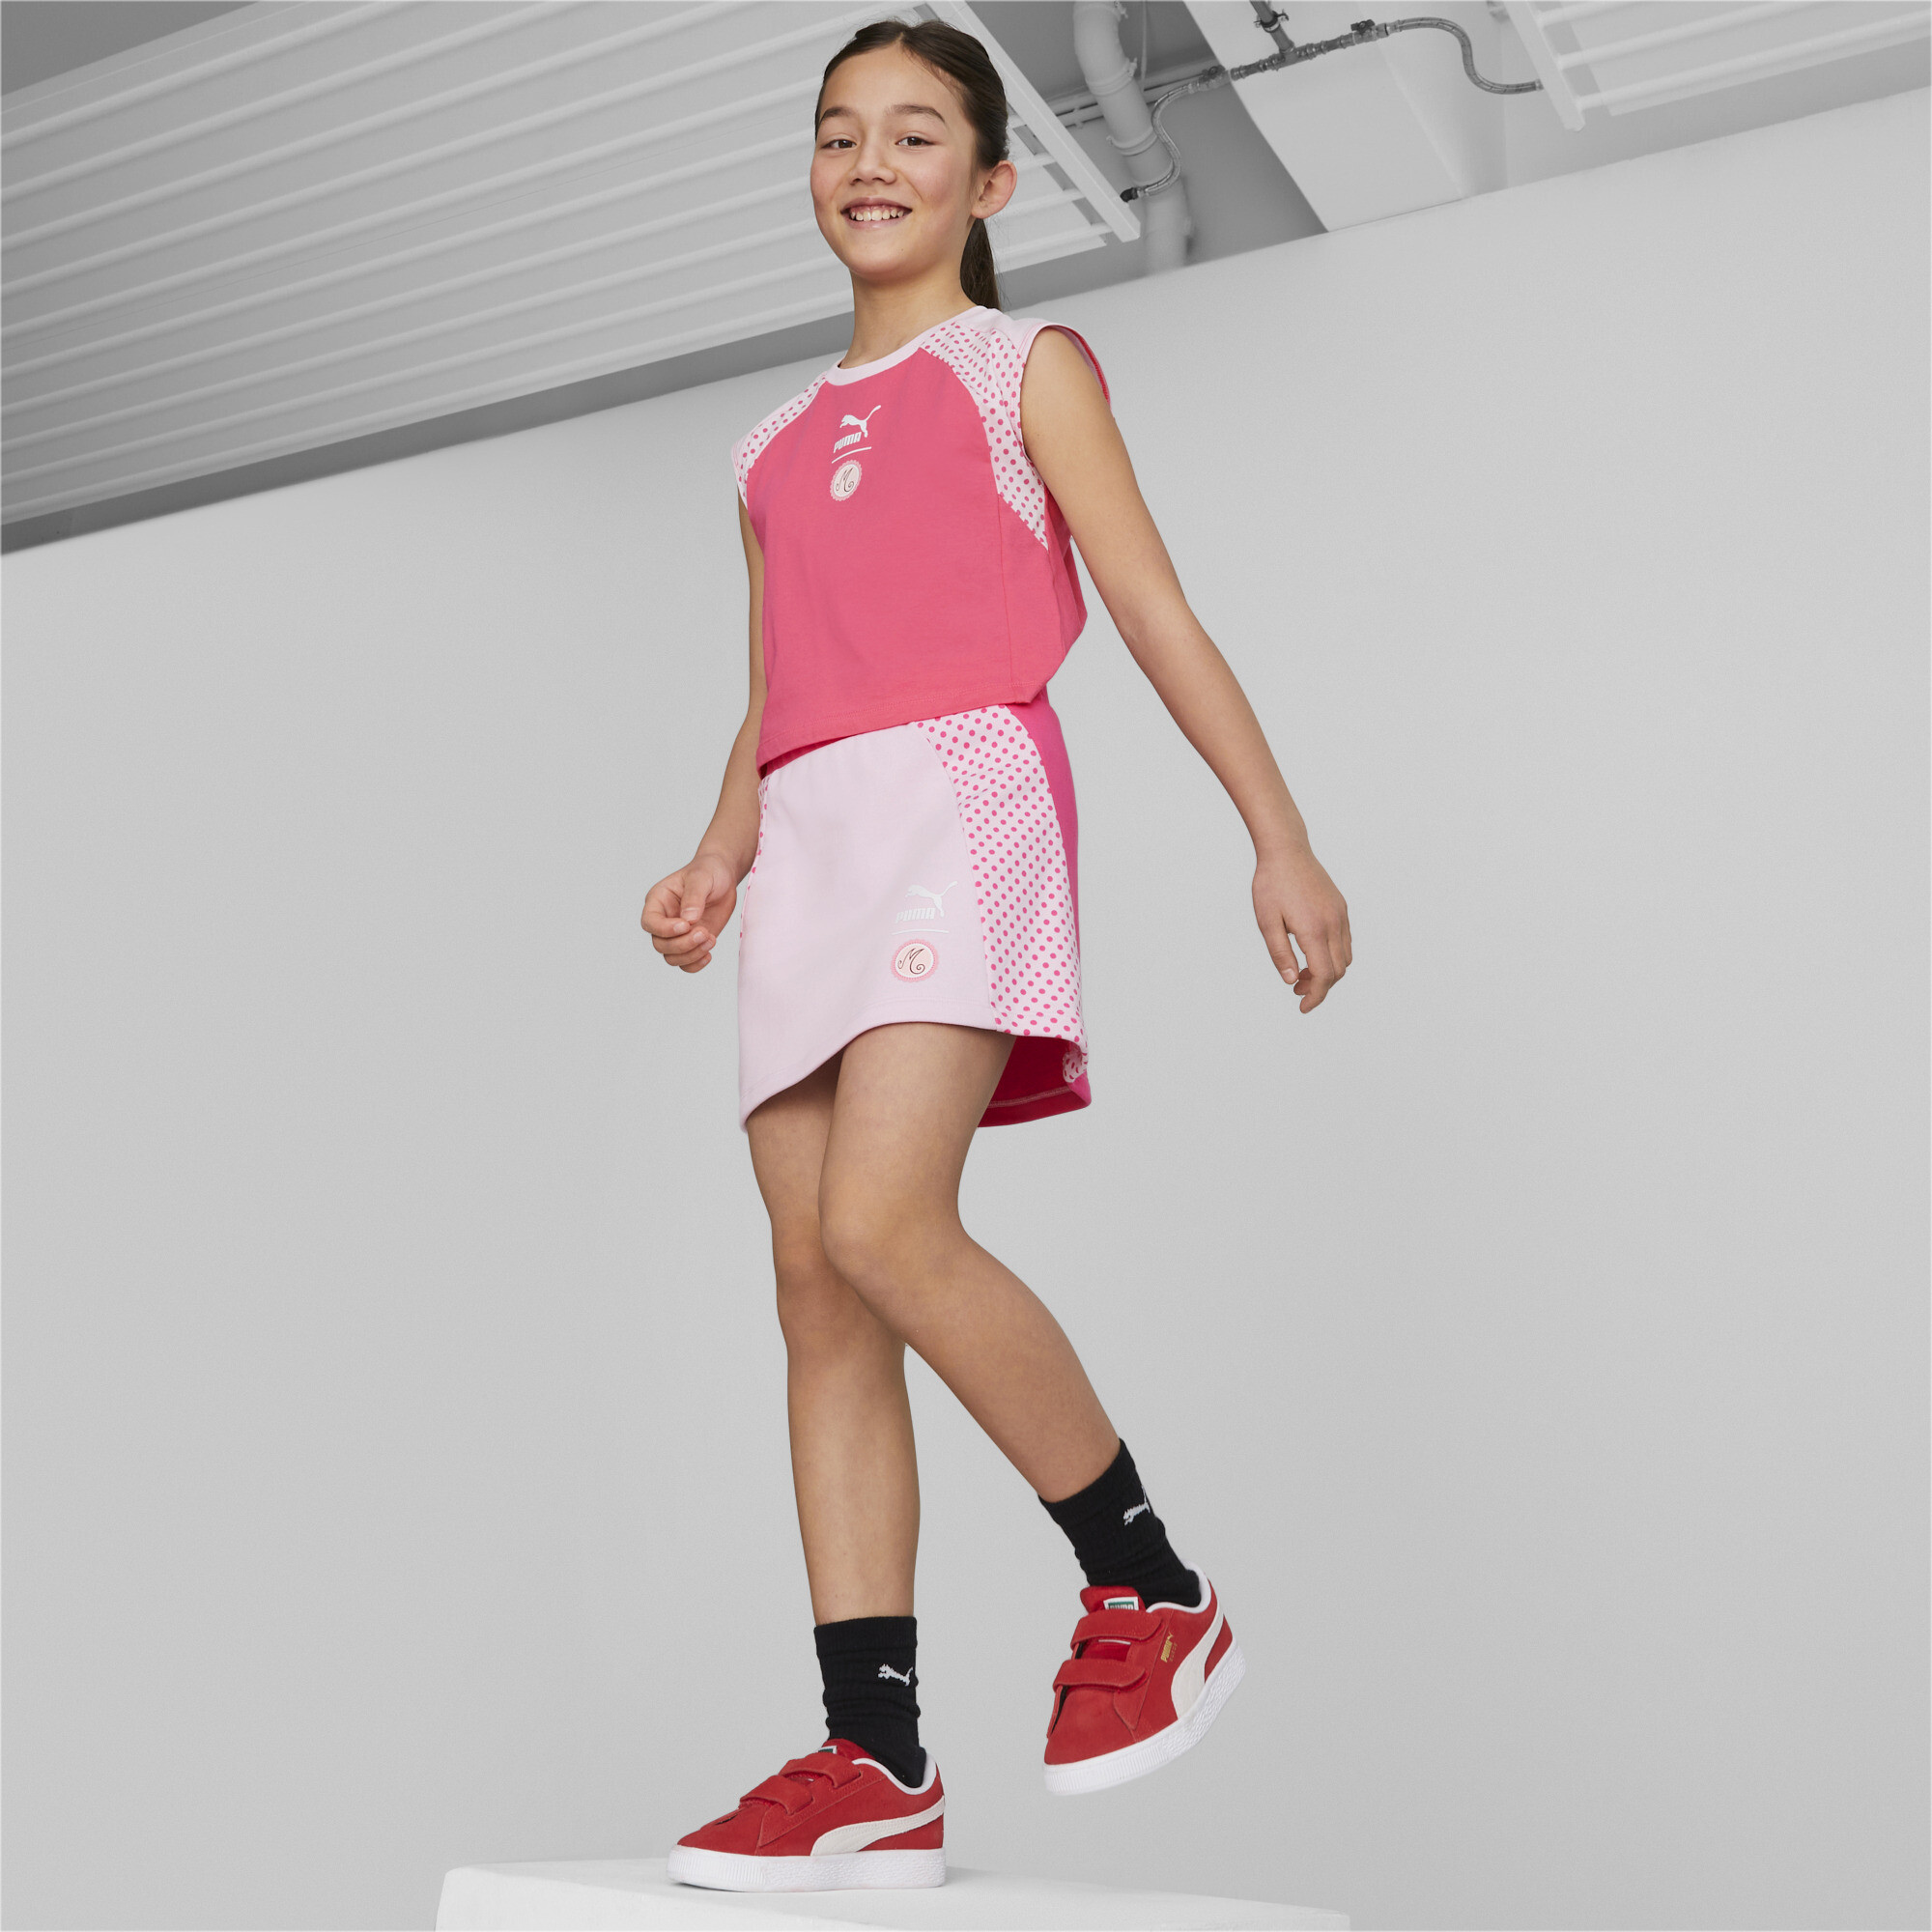 PUMA X MIRACULOUS Skirt In Pink, Size 7-8 Youth